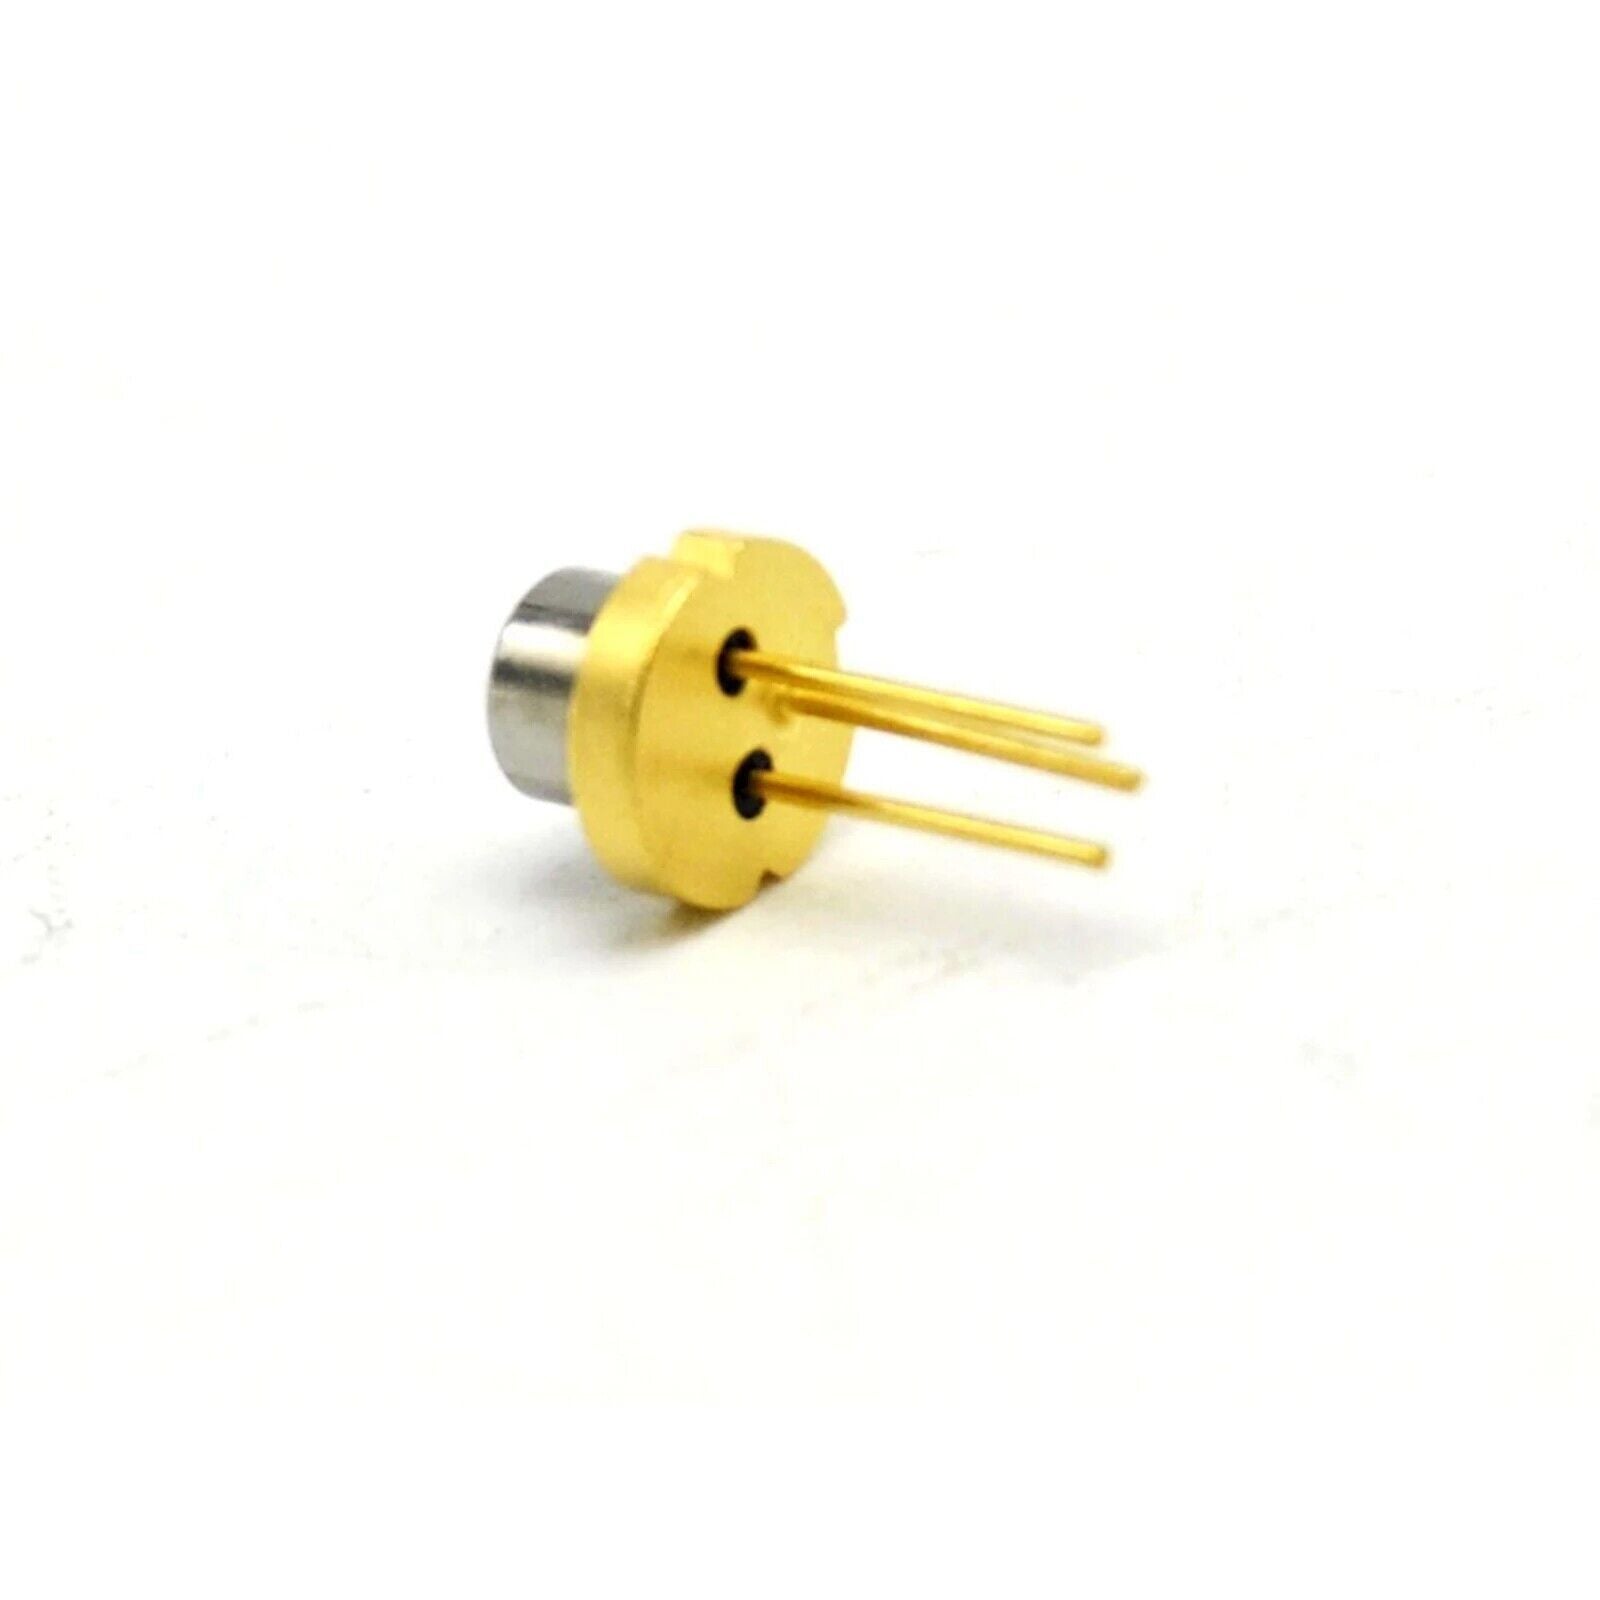 Ushio HL6750MG-A 685nm 55mW Red Laser Diode